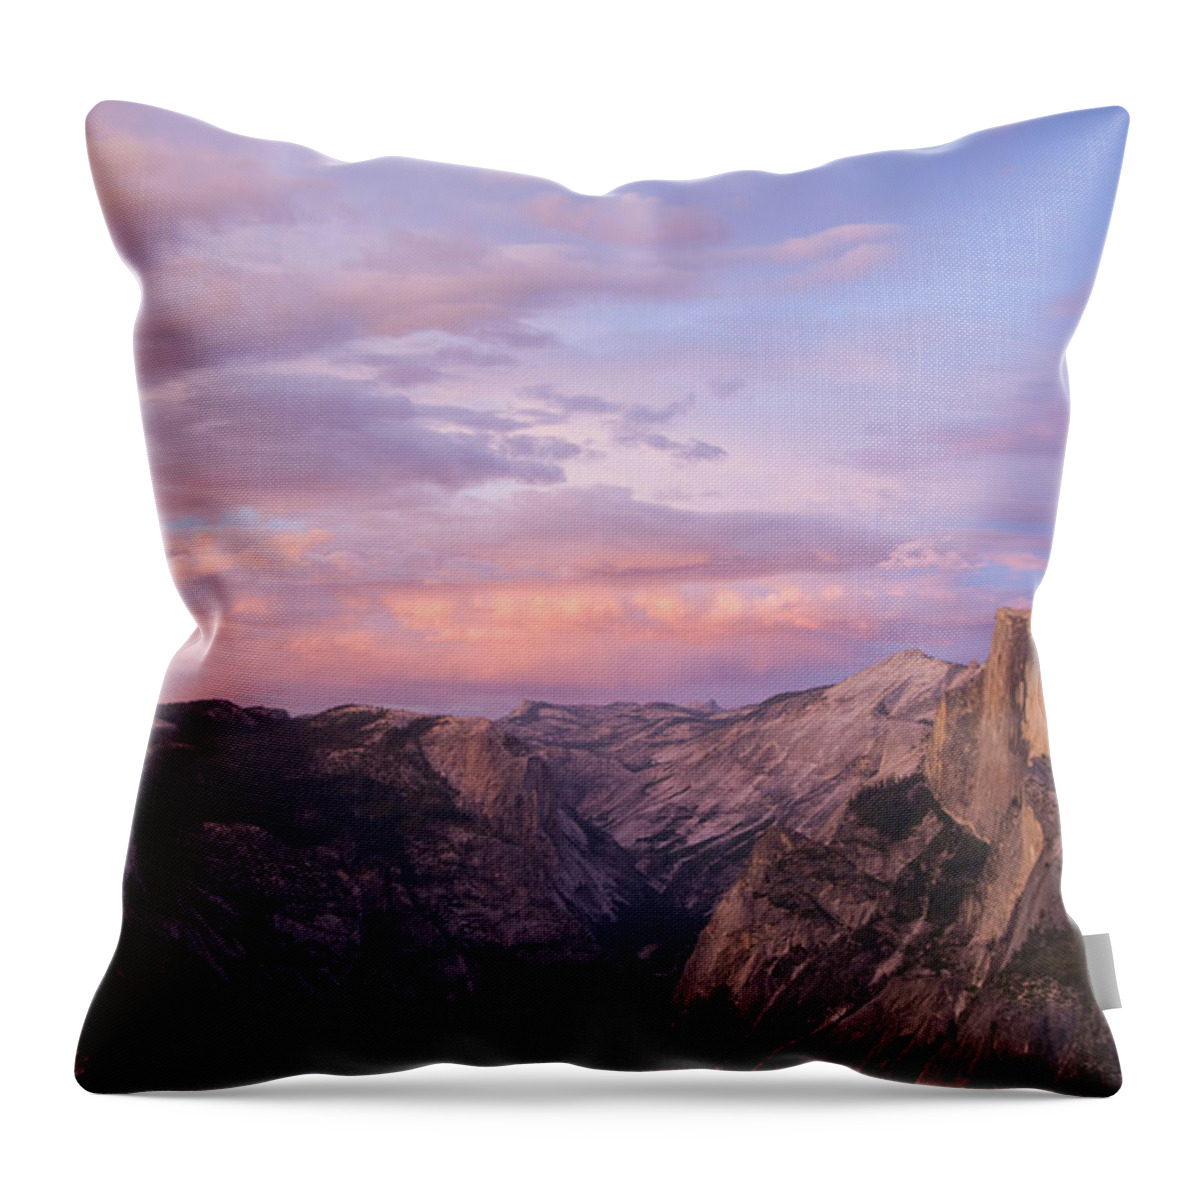 Scenics Throw Pillow featuring the photograph Yosemite National Park At Sunset by Jazle